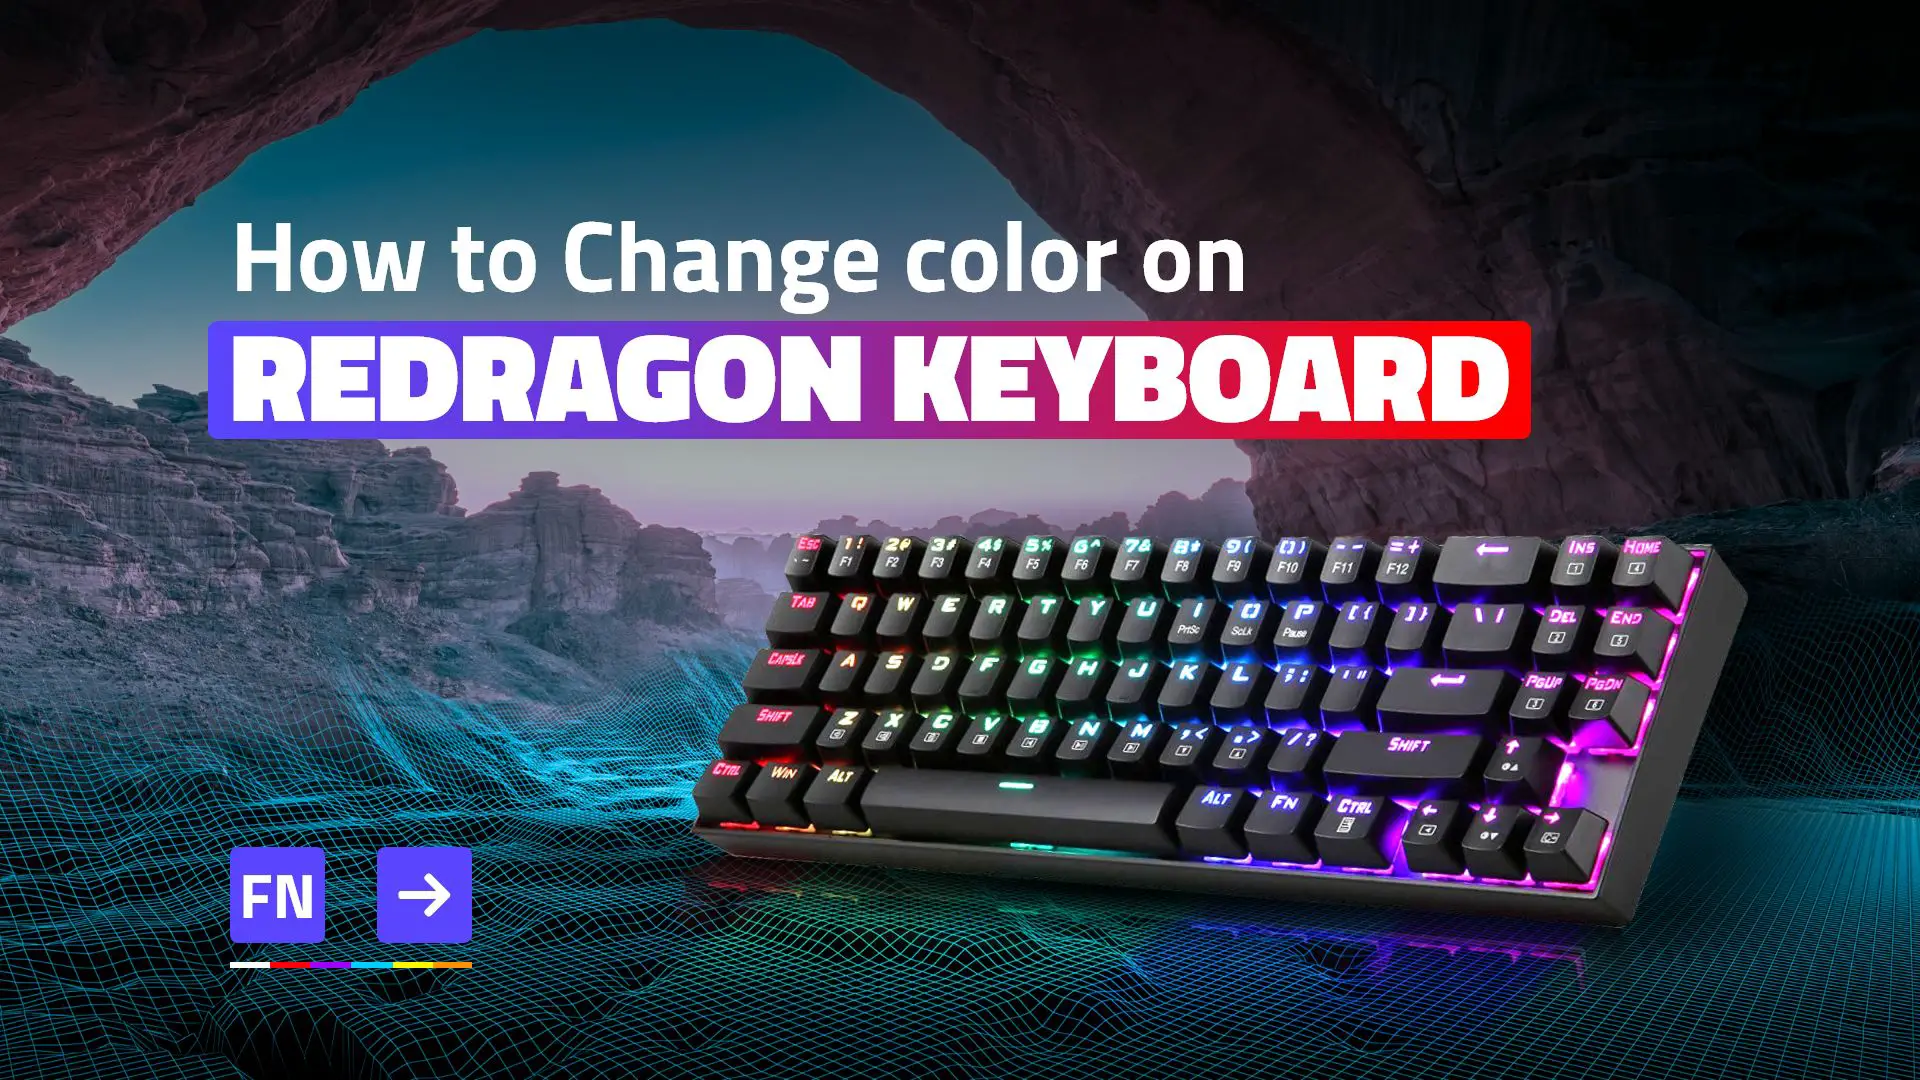 How to change color on REDRAGON keyboard- Full Guide